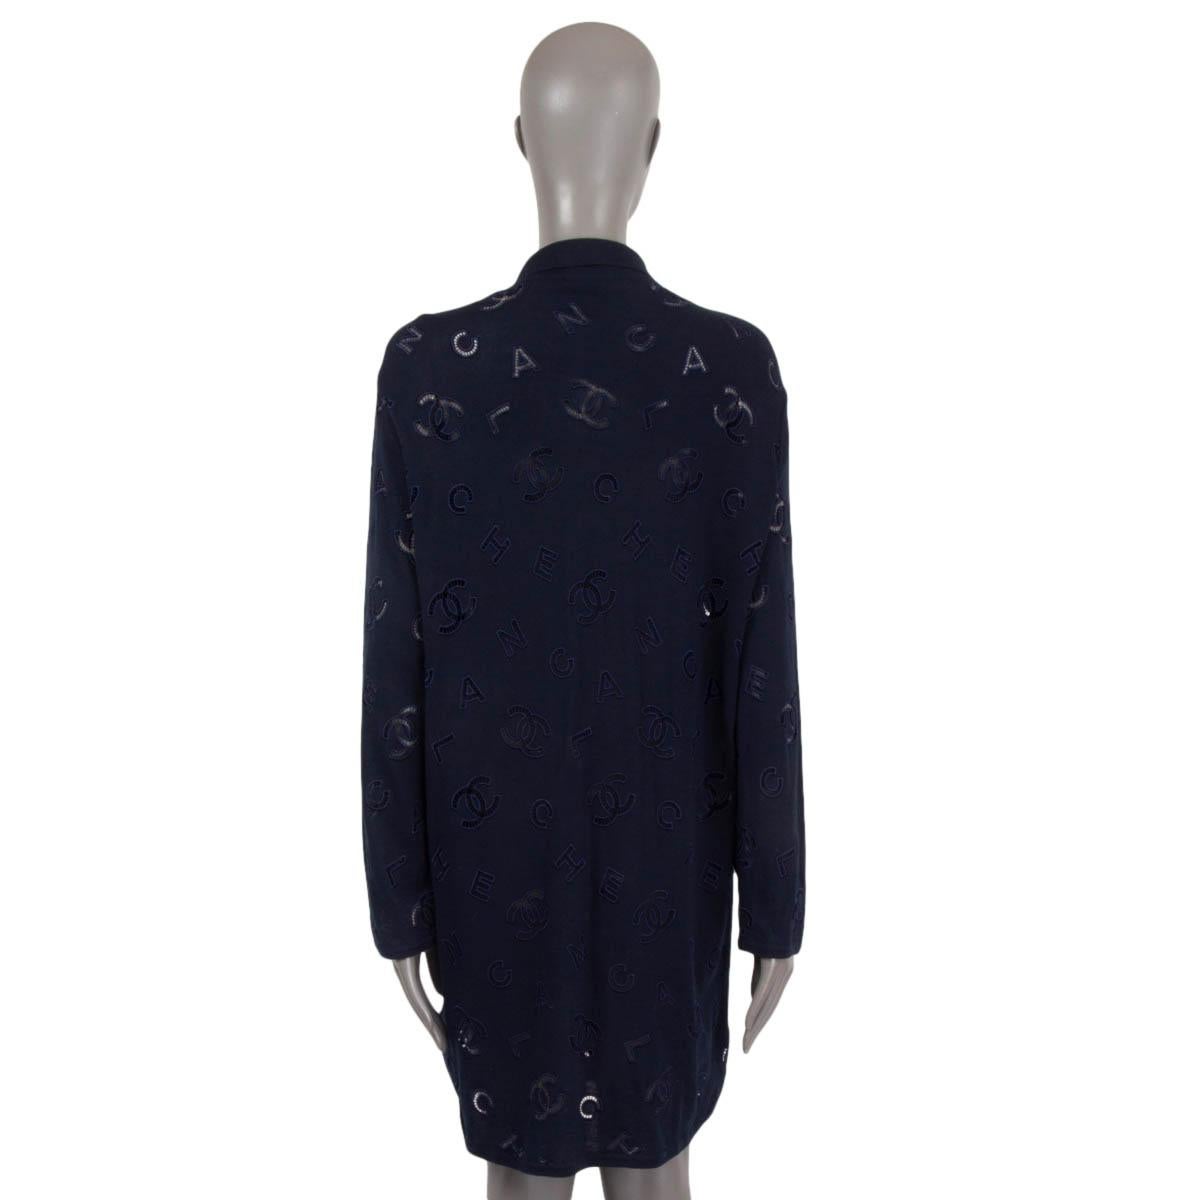 CHANEL navy blue cotton 2020 20C LOGO EMBROIDERED Cardigan Sweater 38 S 1